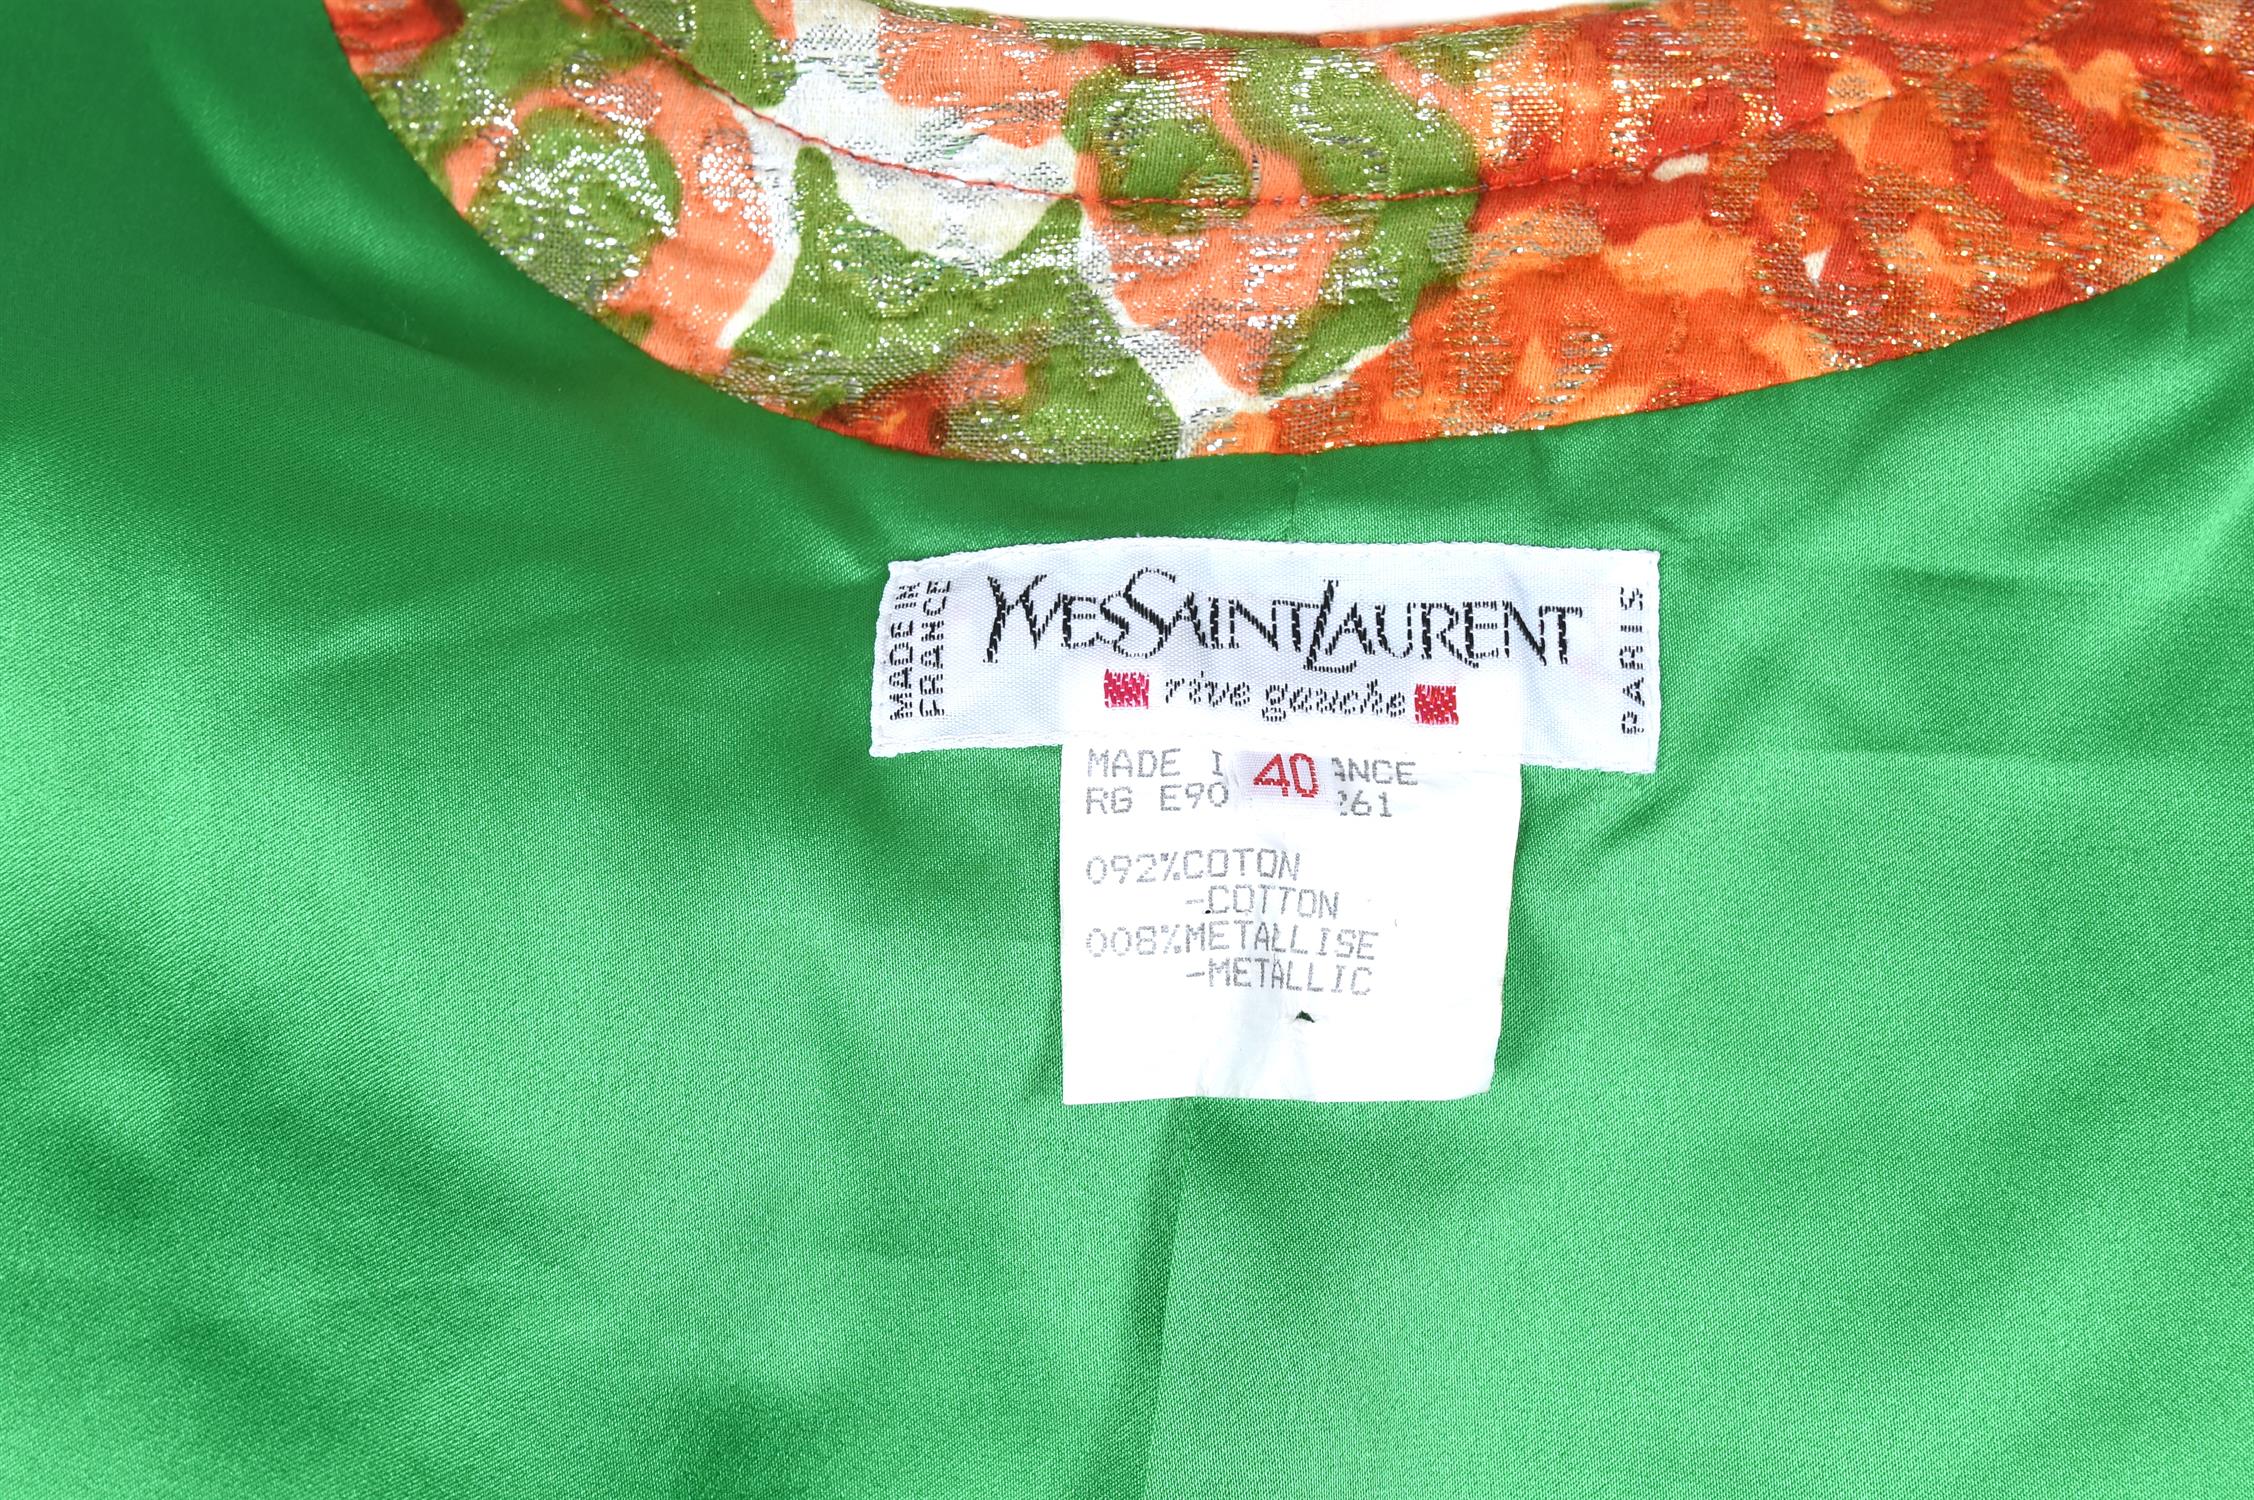 YVES SAINT LAURENT Rive Gauche vintage 1980s/90s orange and green jacket with green silk lining - Image 7 of 7